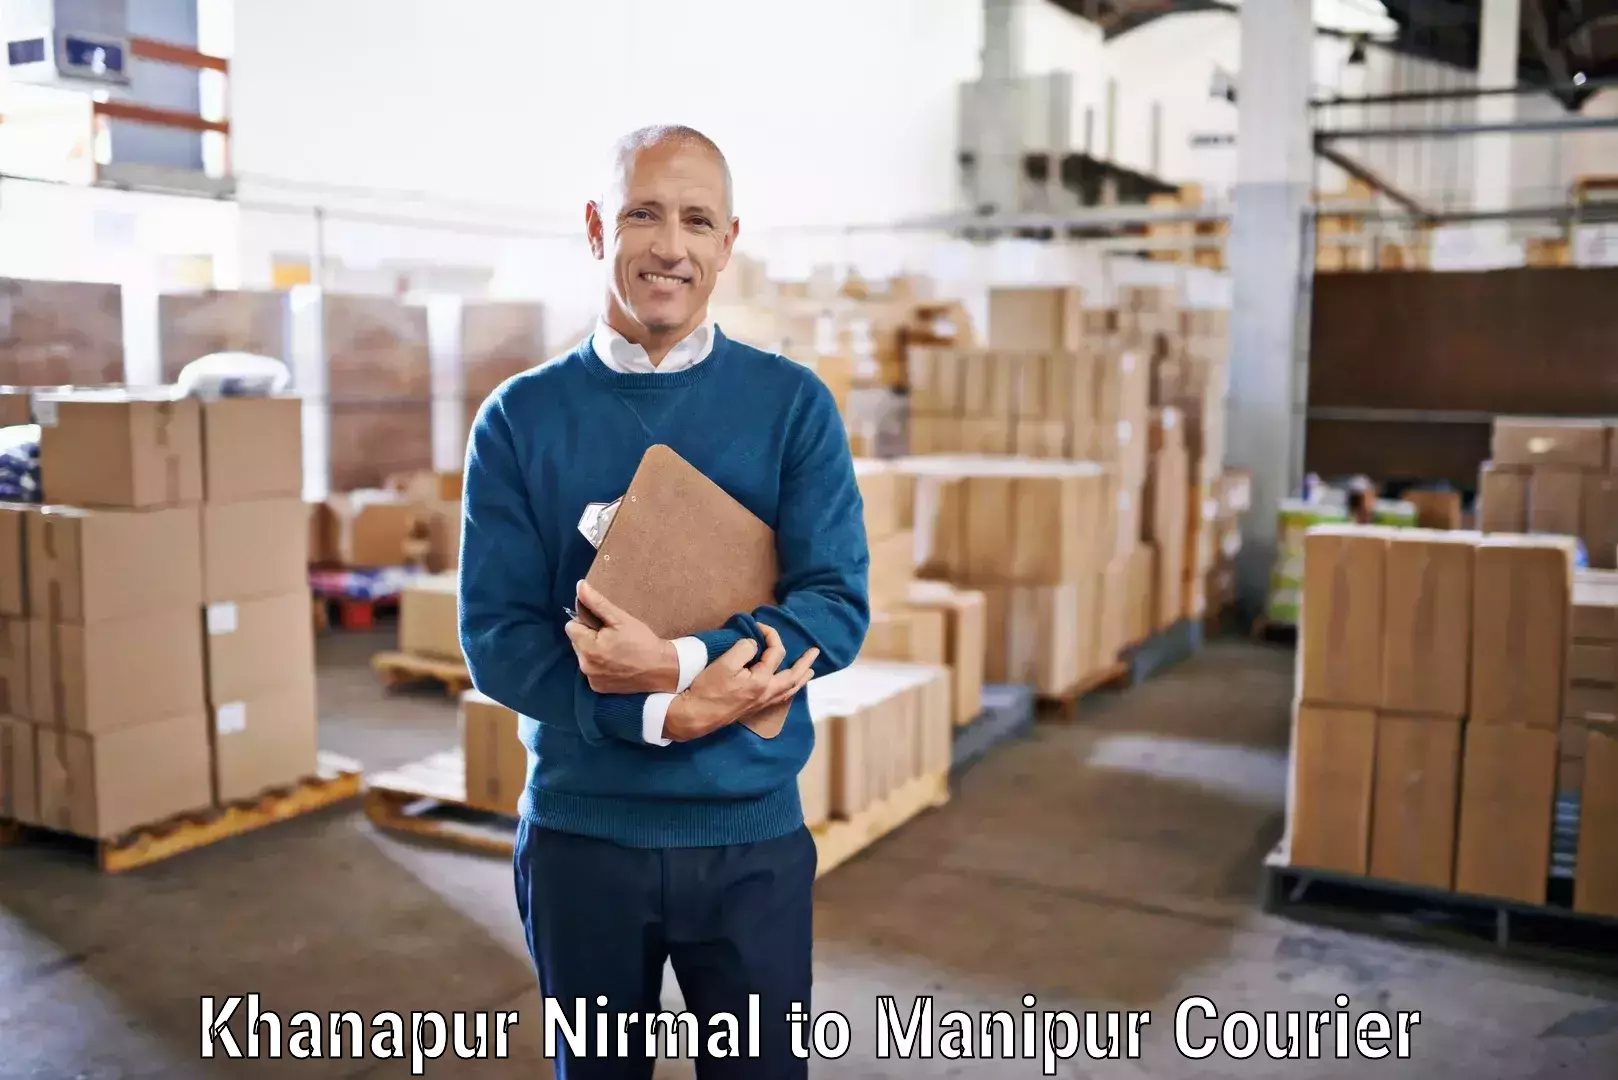 Reliable freight solutions Khanapur Nirmal to Manipur